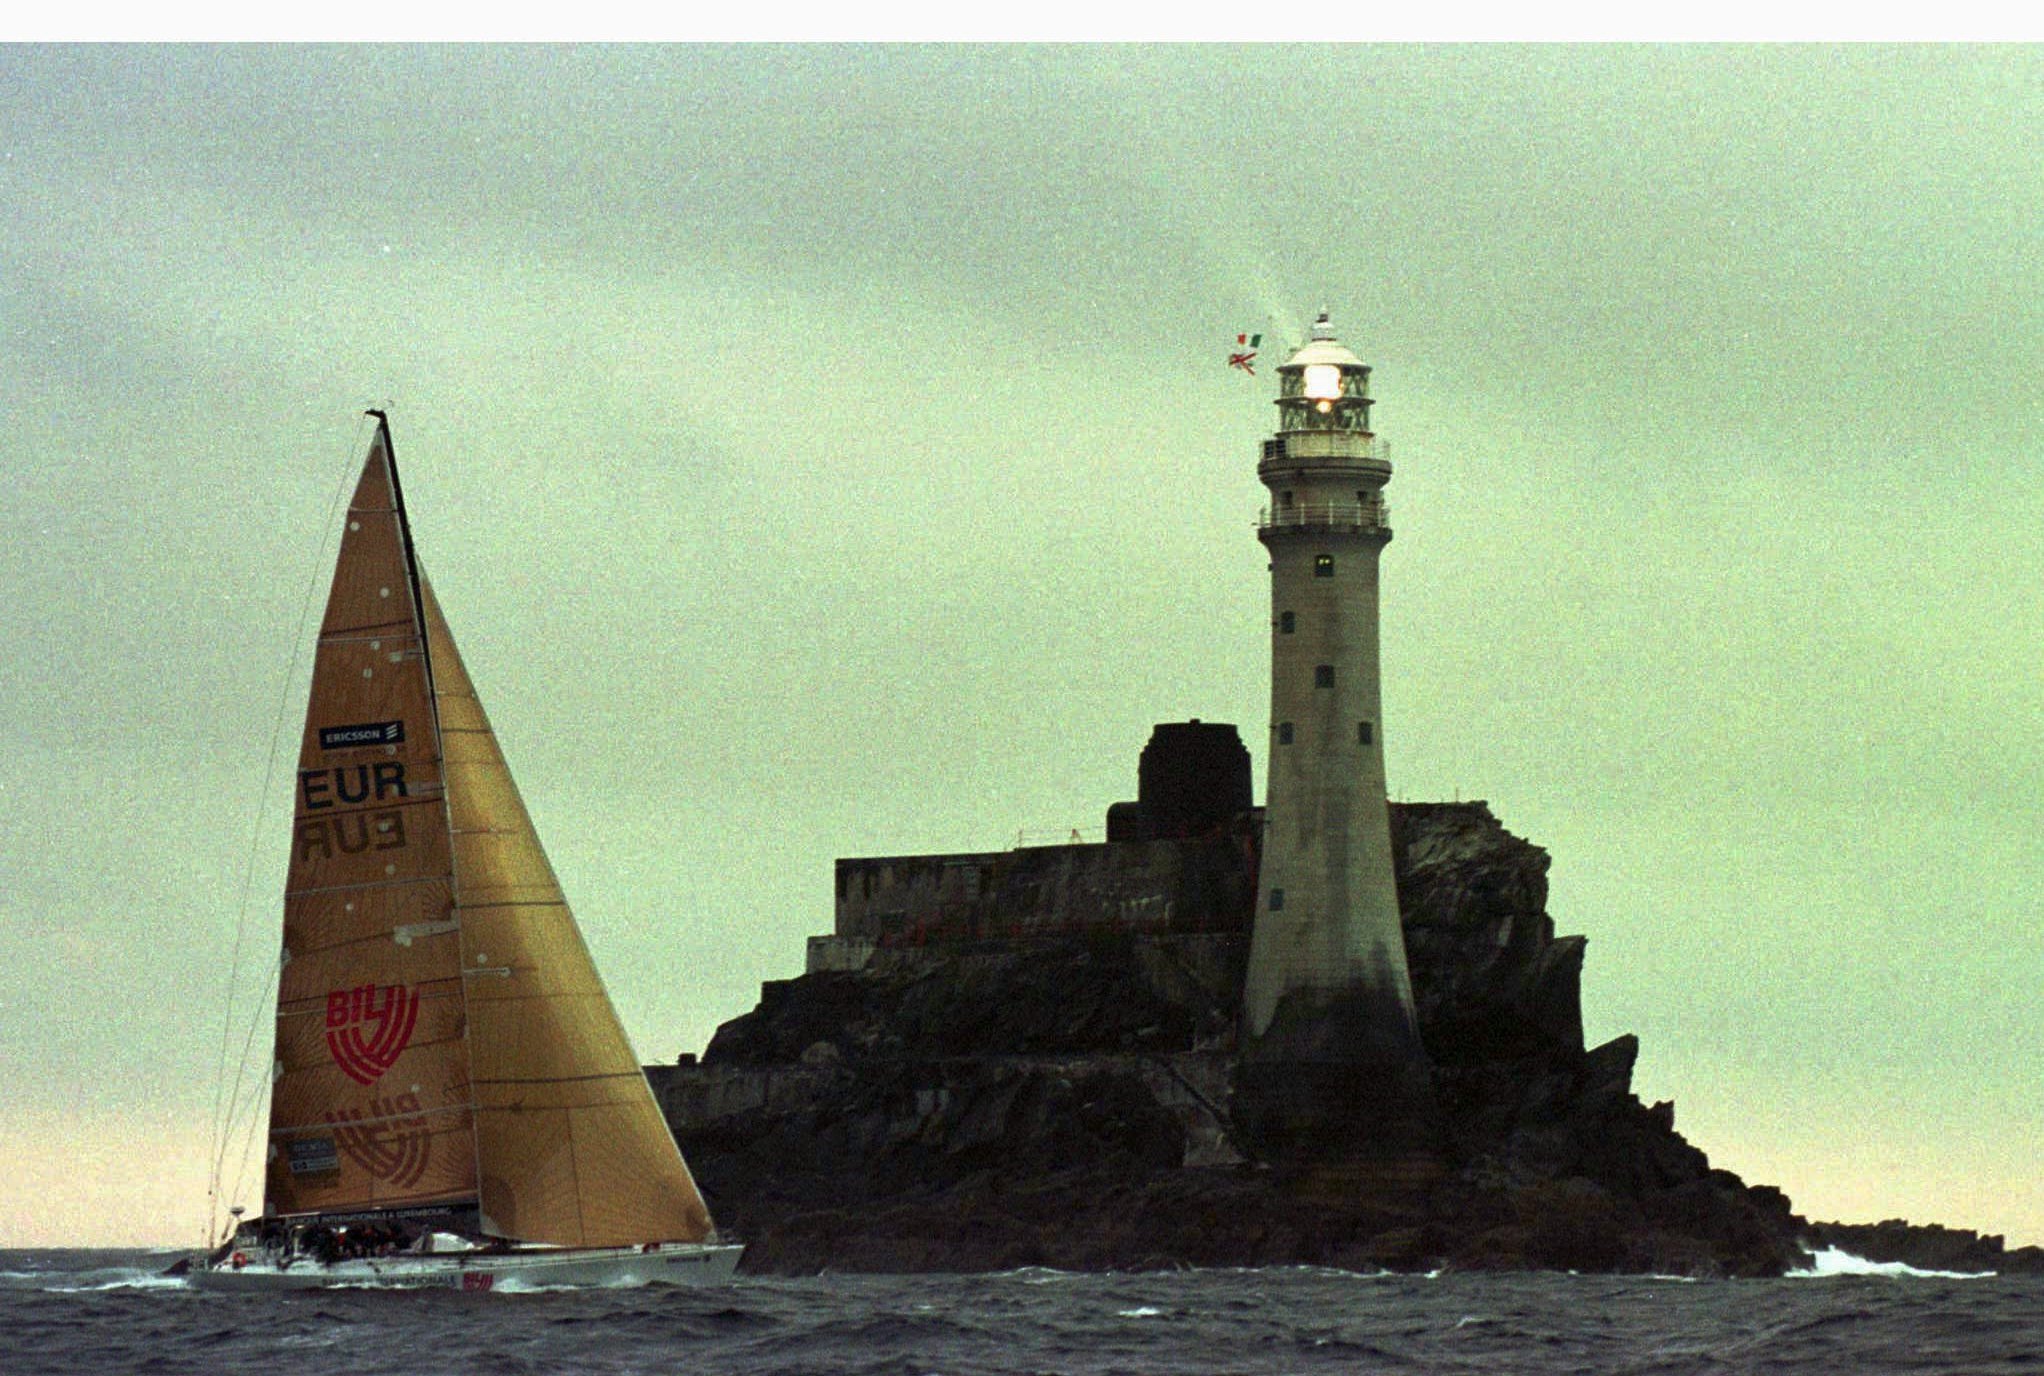 The New Zealand owned yacht 'Bil' rounds the Fastnet lighthouse, the scene of a violent storm in 1979. Photo: Reuters